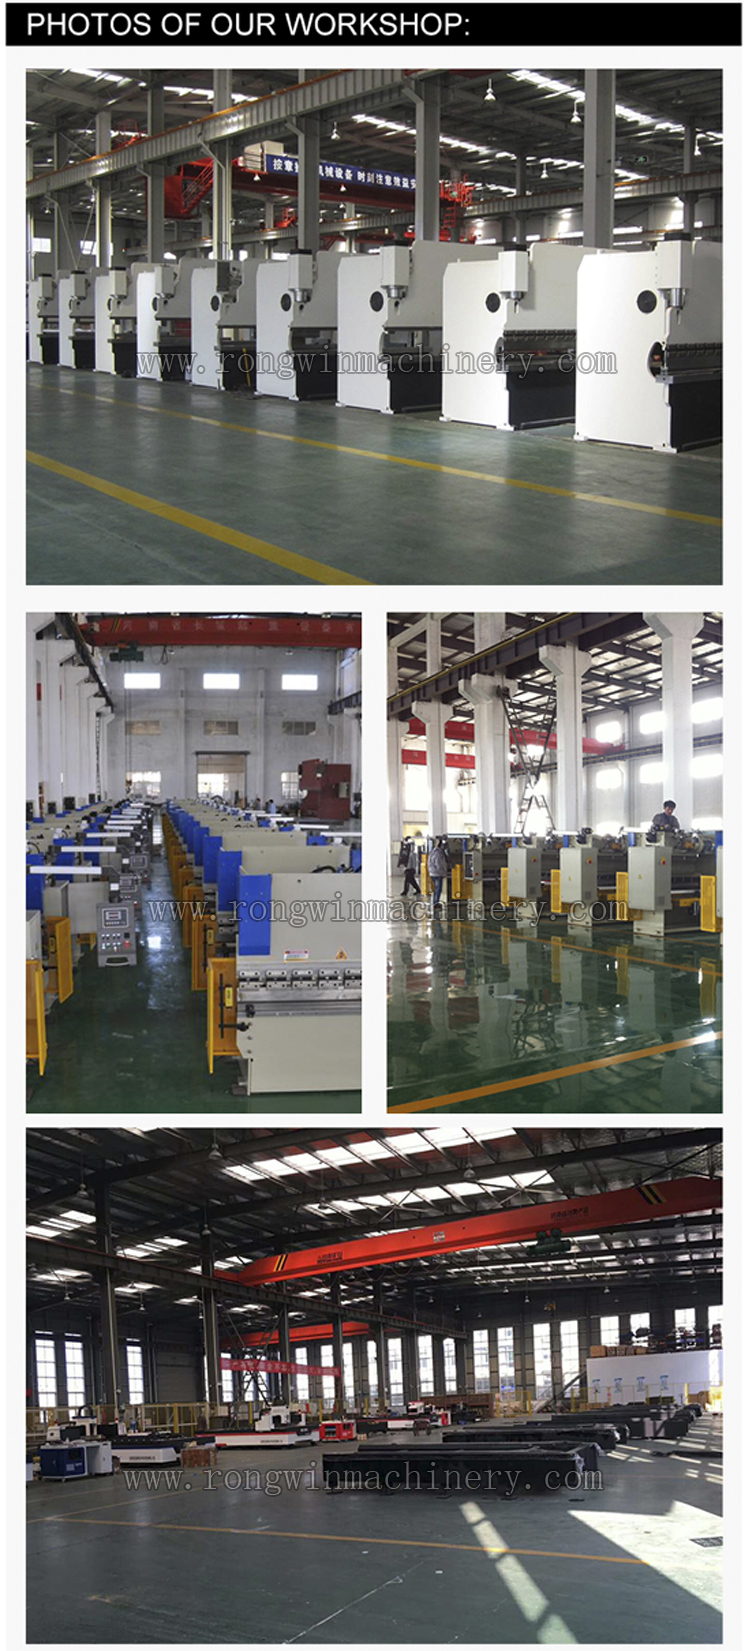 Rongwin v cut cnc supplier for aluminum plate-14